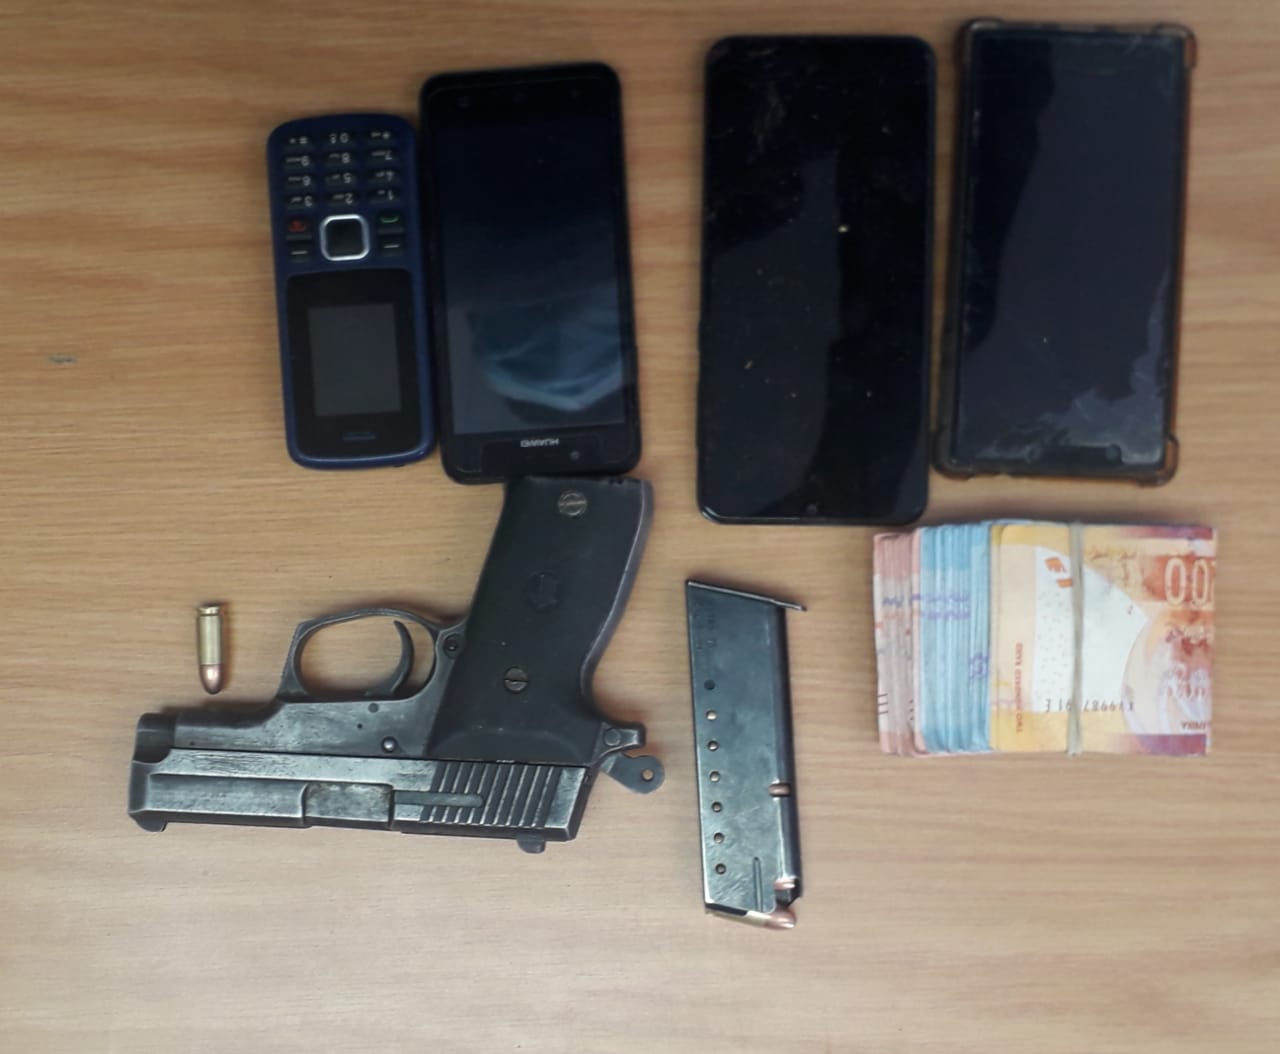 Five suspects apprehended in Milnerton and Strand for the illegal possession of firearms